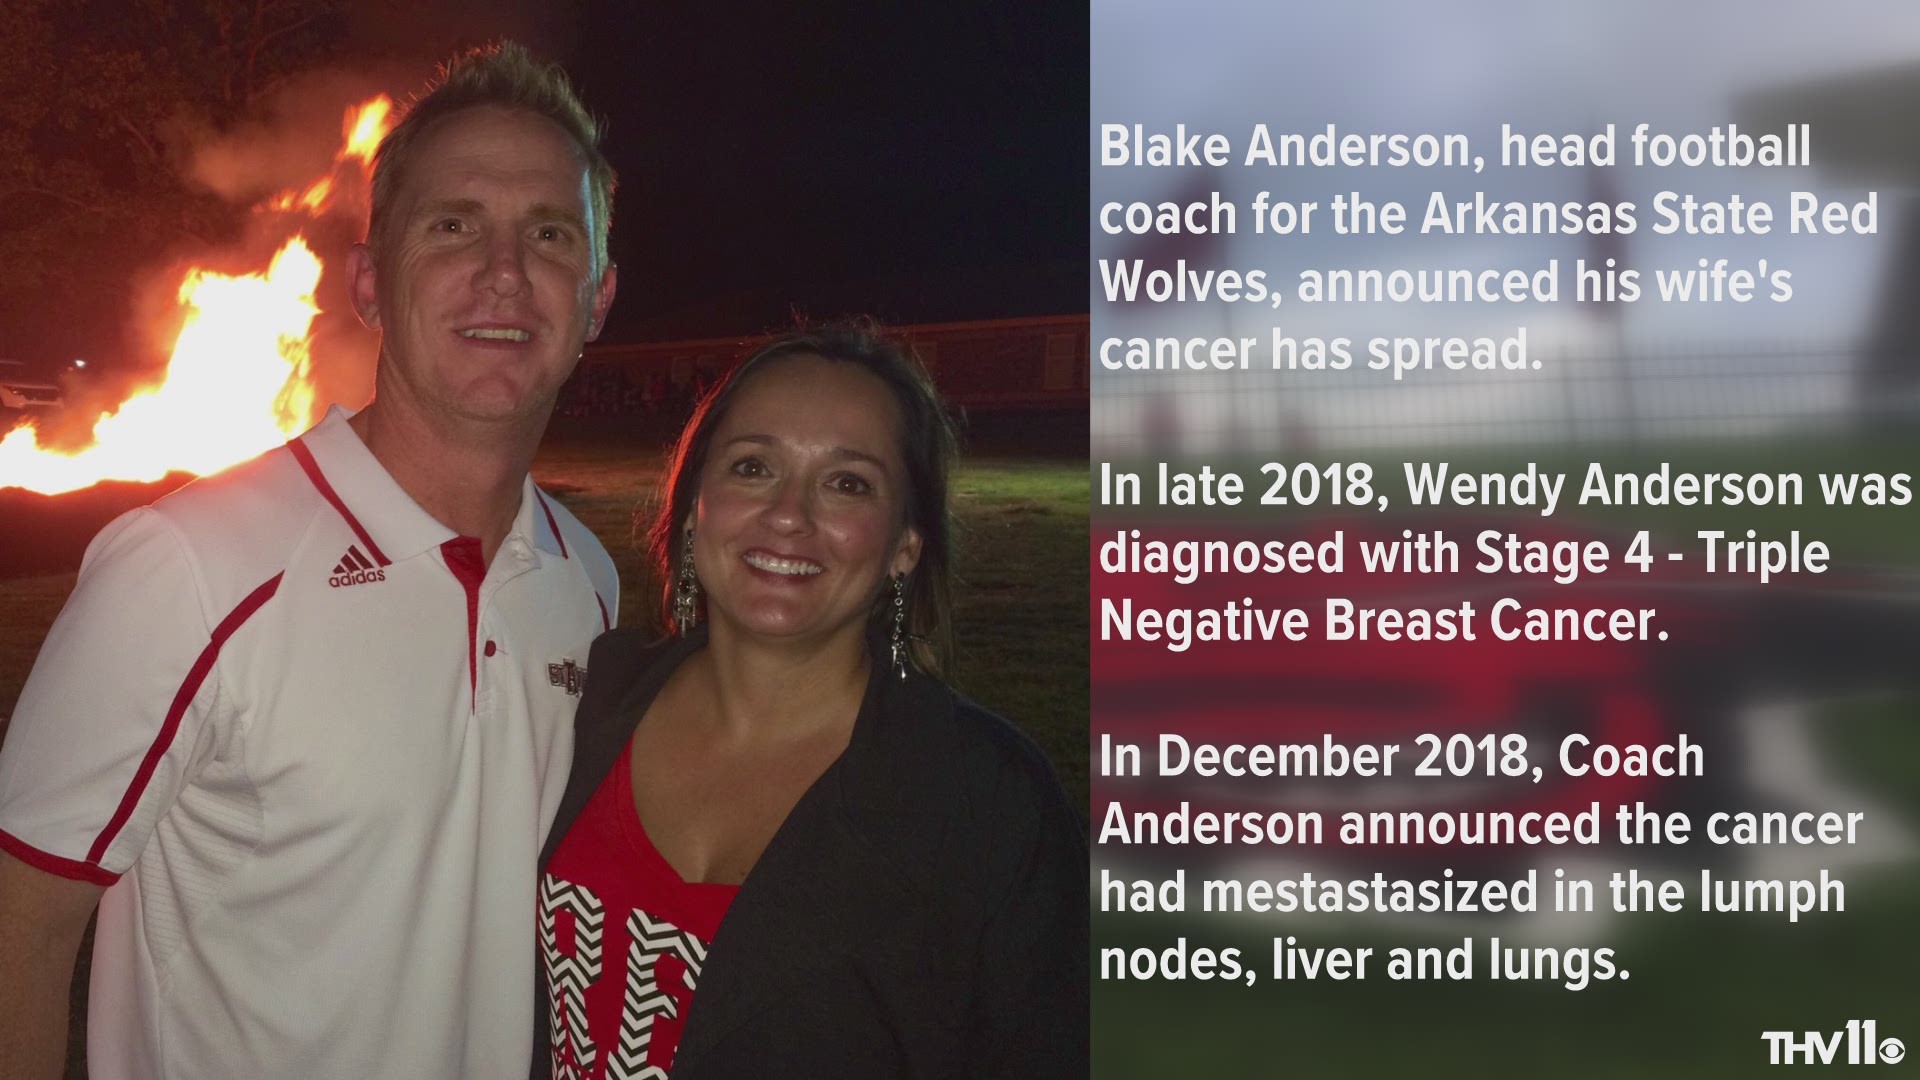 Blake Anderson, head football coach for the Arkansas State Red Wolves announced his wife’s cancer has spread.